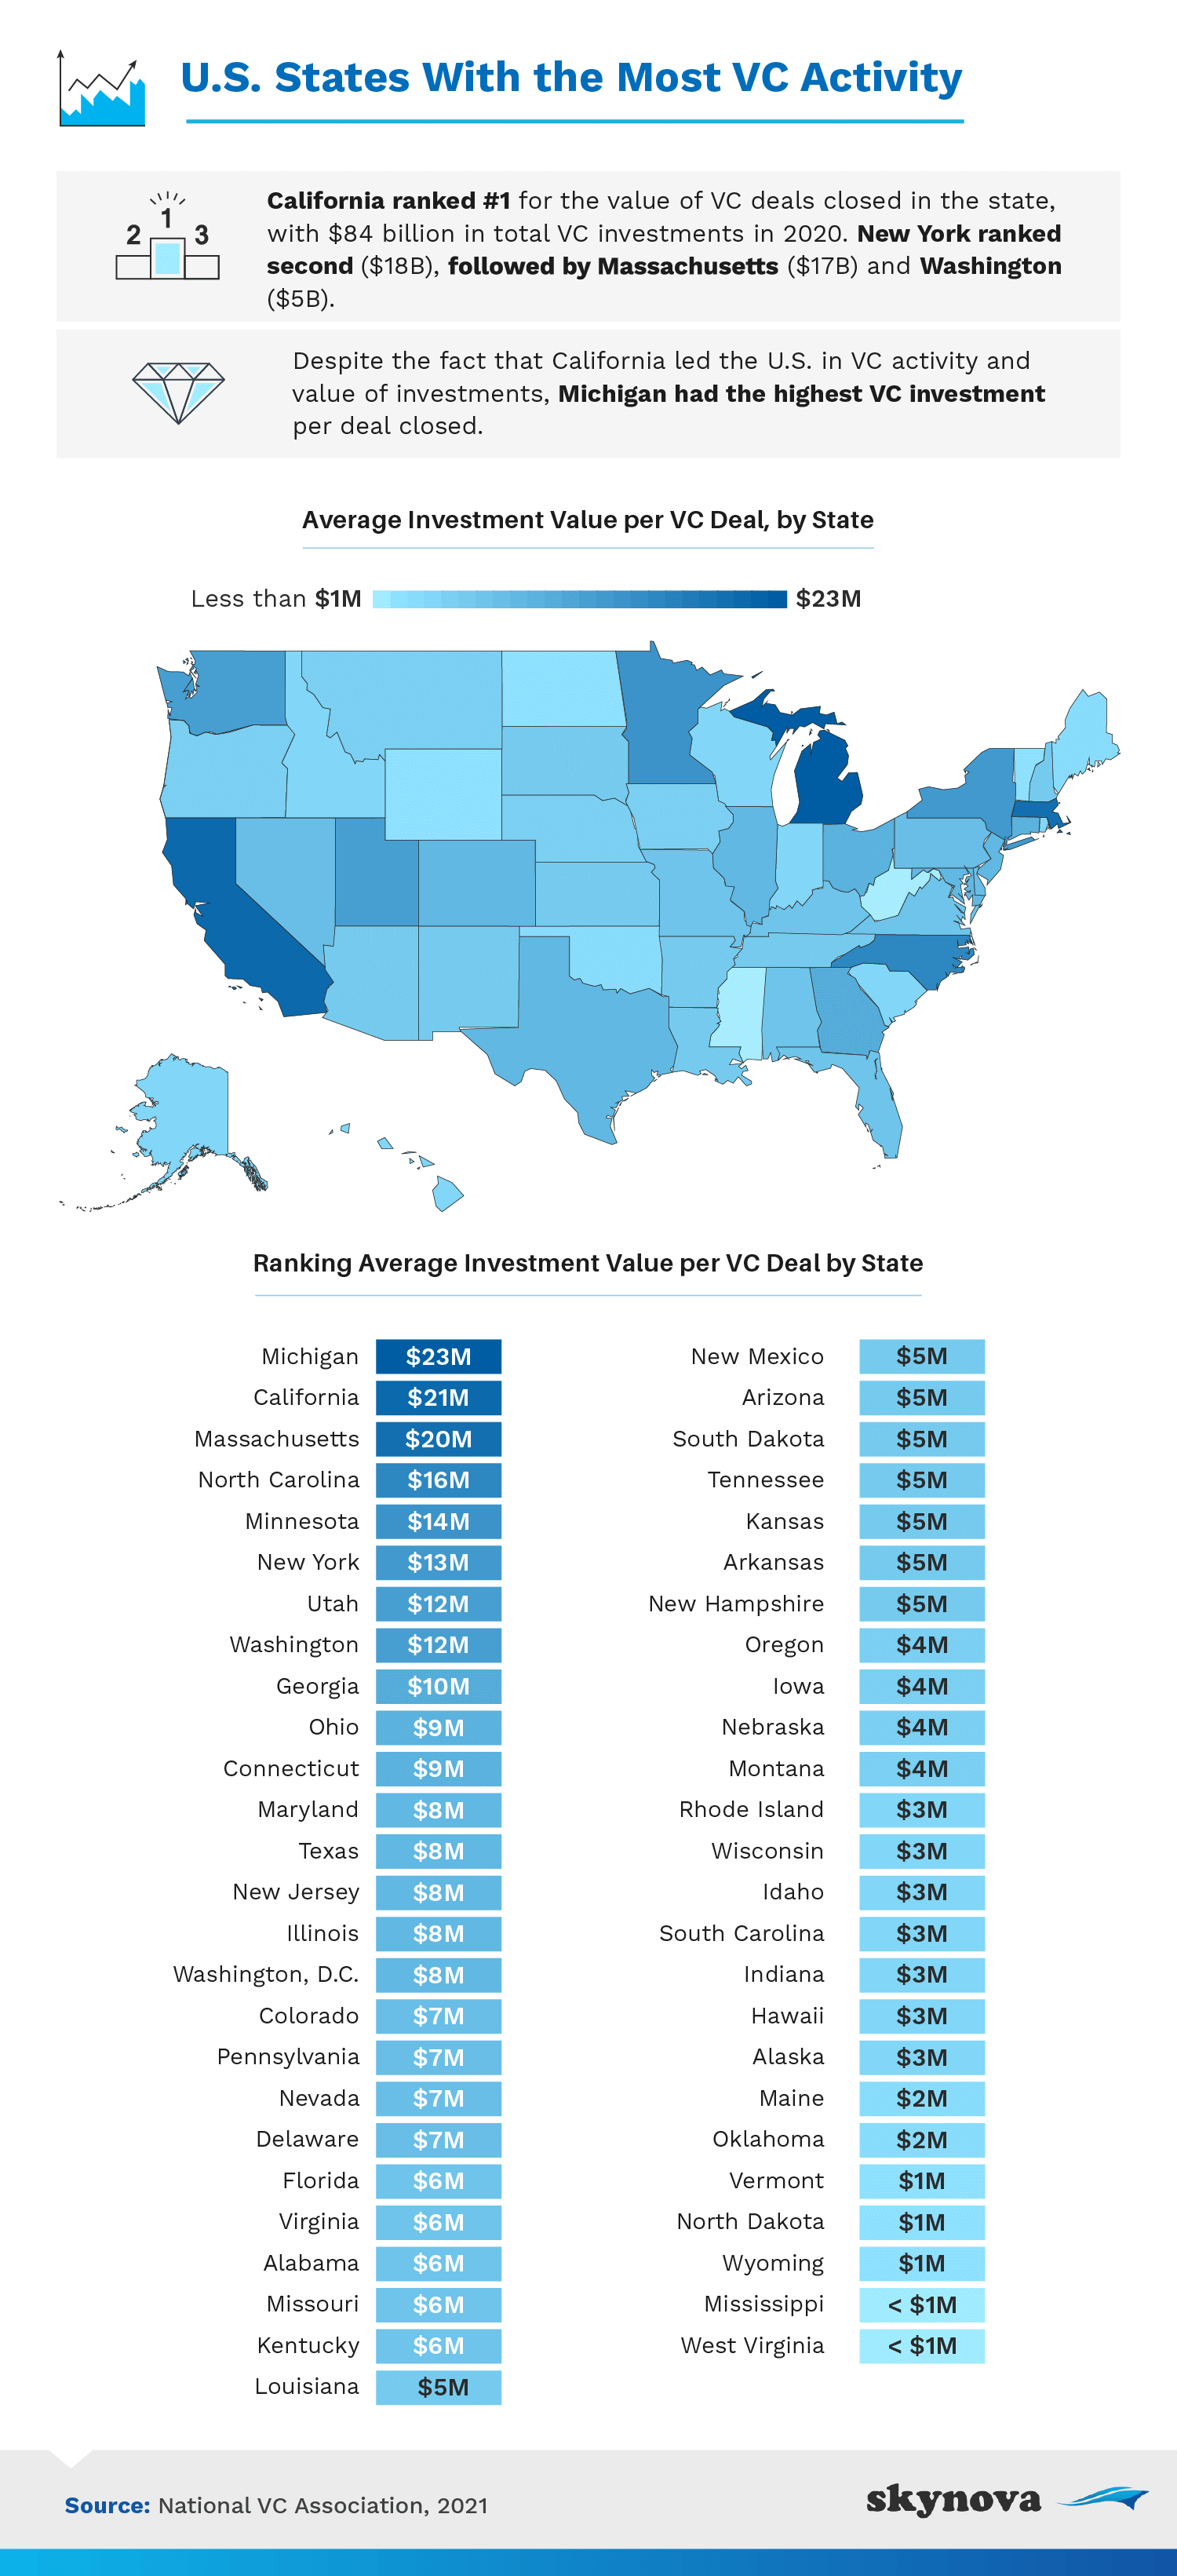 US States with the most VC activity